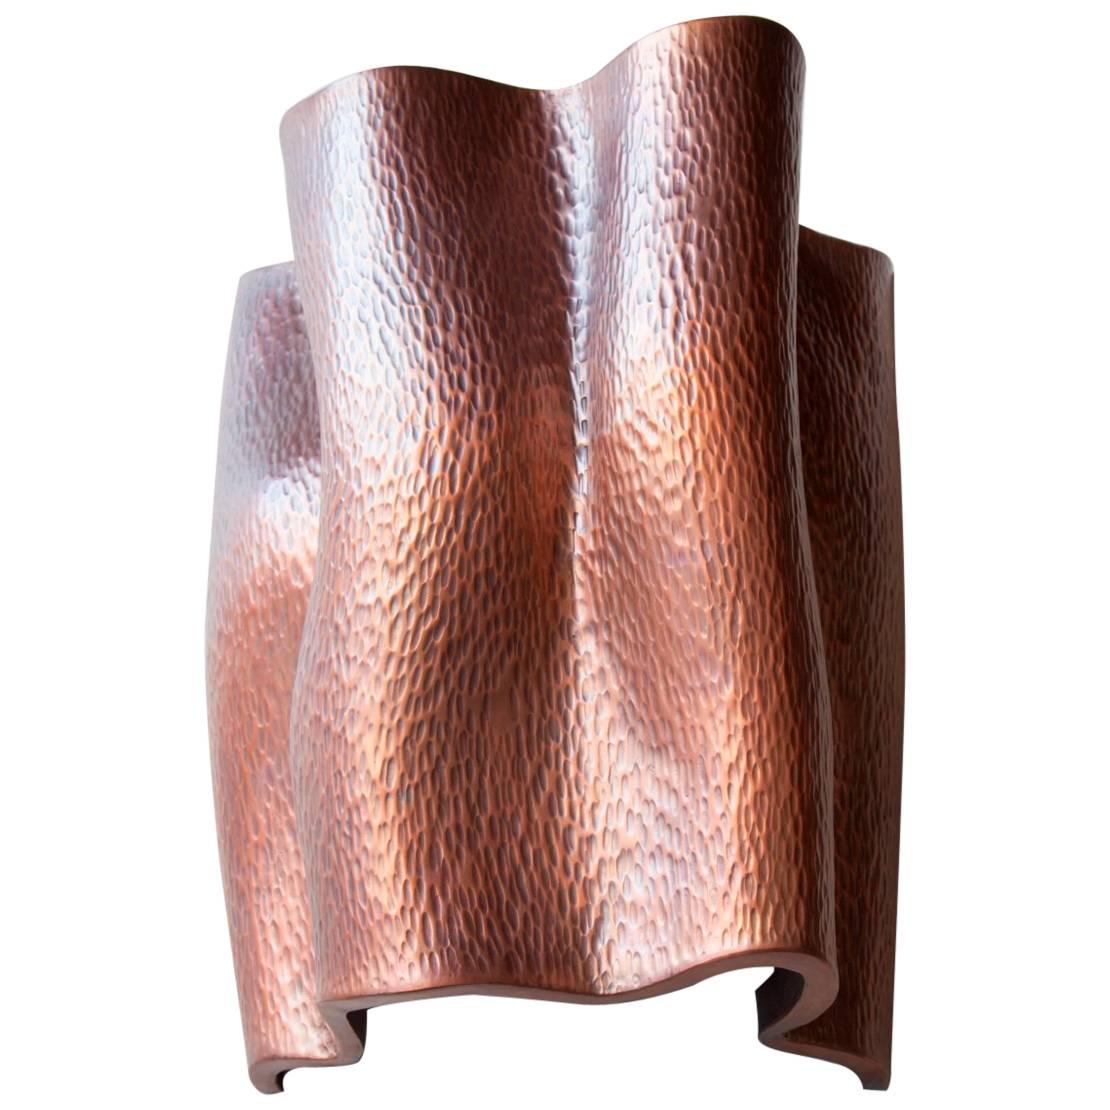 Ji Guan Sconce, Antique Copper by Robert Kuo, Limited Edition For Sale